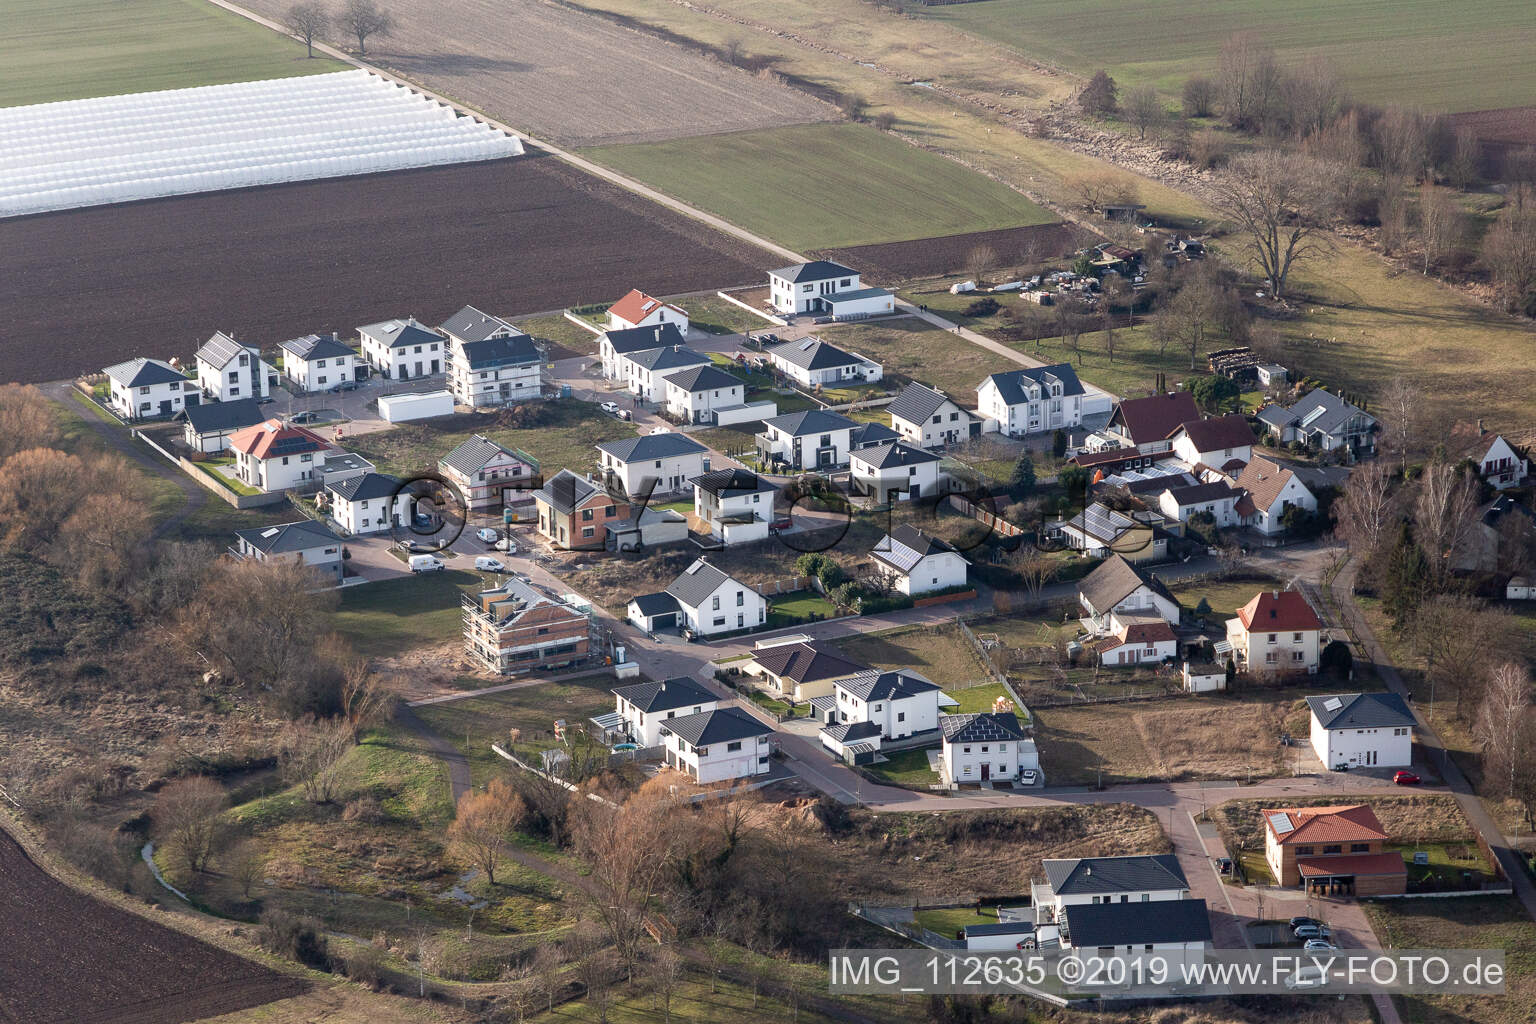 Aerial view of Offenbach an der Queich in the state Rhineland-Palatinate, Germany